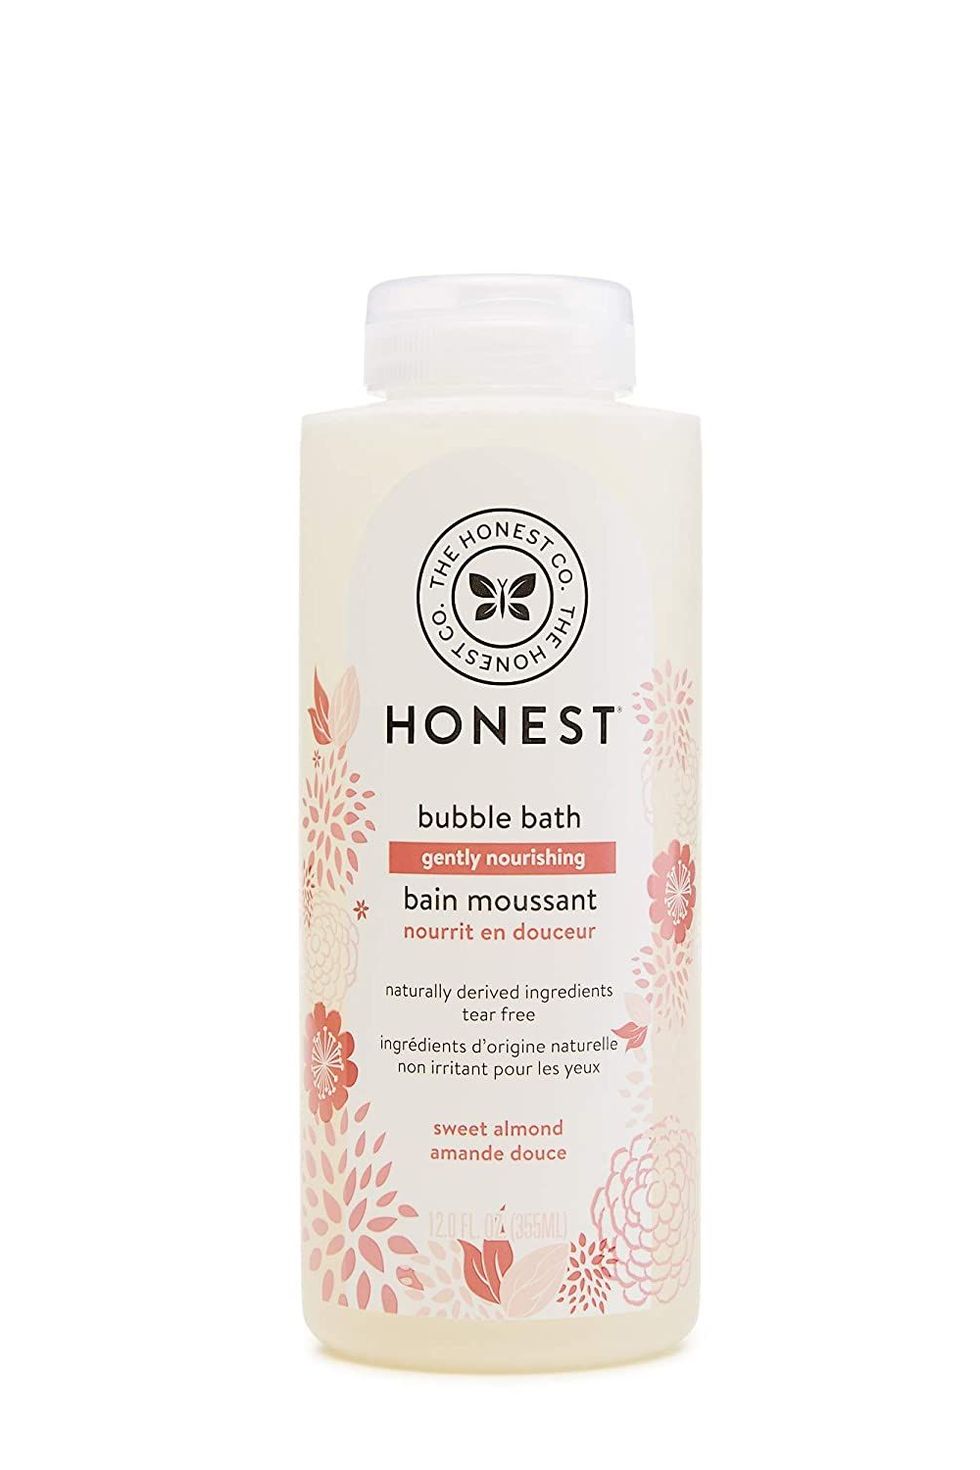 17 Best Bubble Bath Products - Luxury Products For A Relaxing Bubble Bath